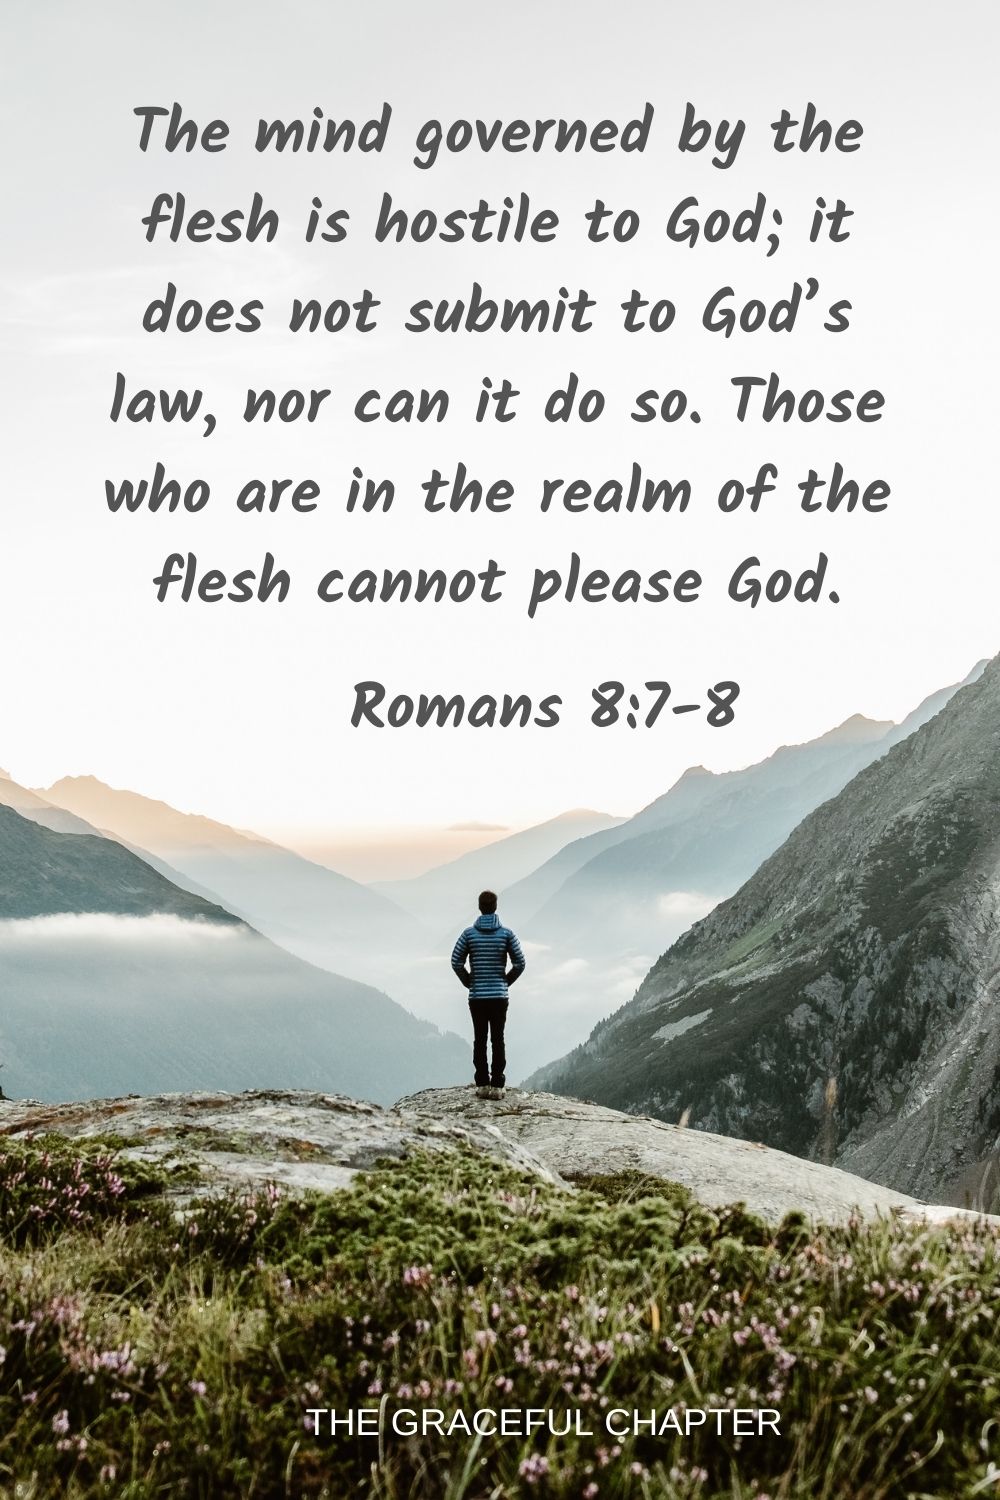 The mind governed by the flesh is hostile to God; it does not submit to God’s law, nor can it do so. Those who are in the realm of the flesh cannot please God. Romans 8:7-8